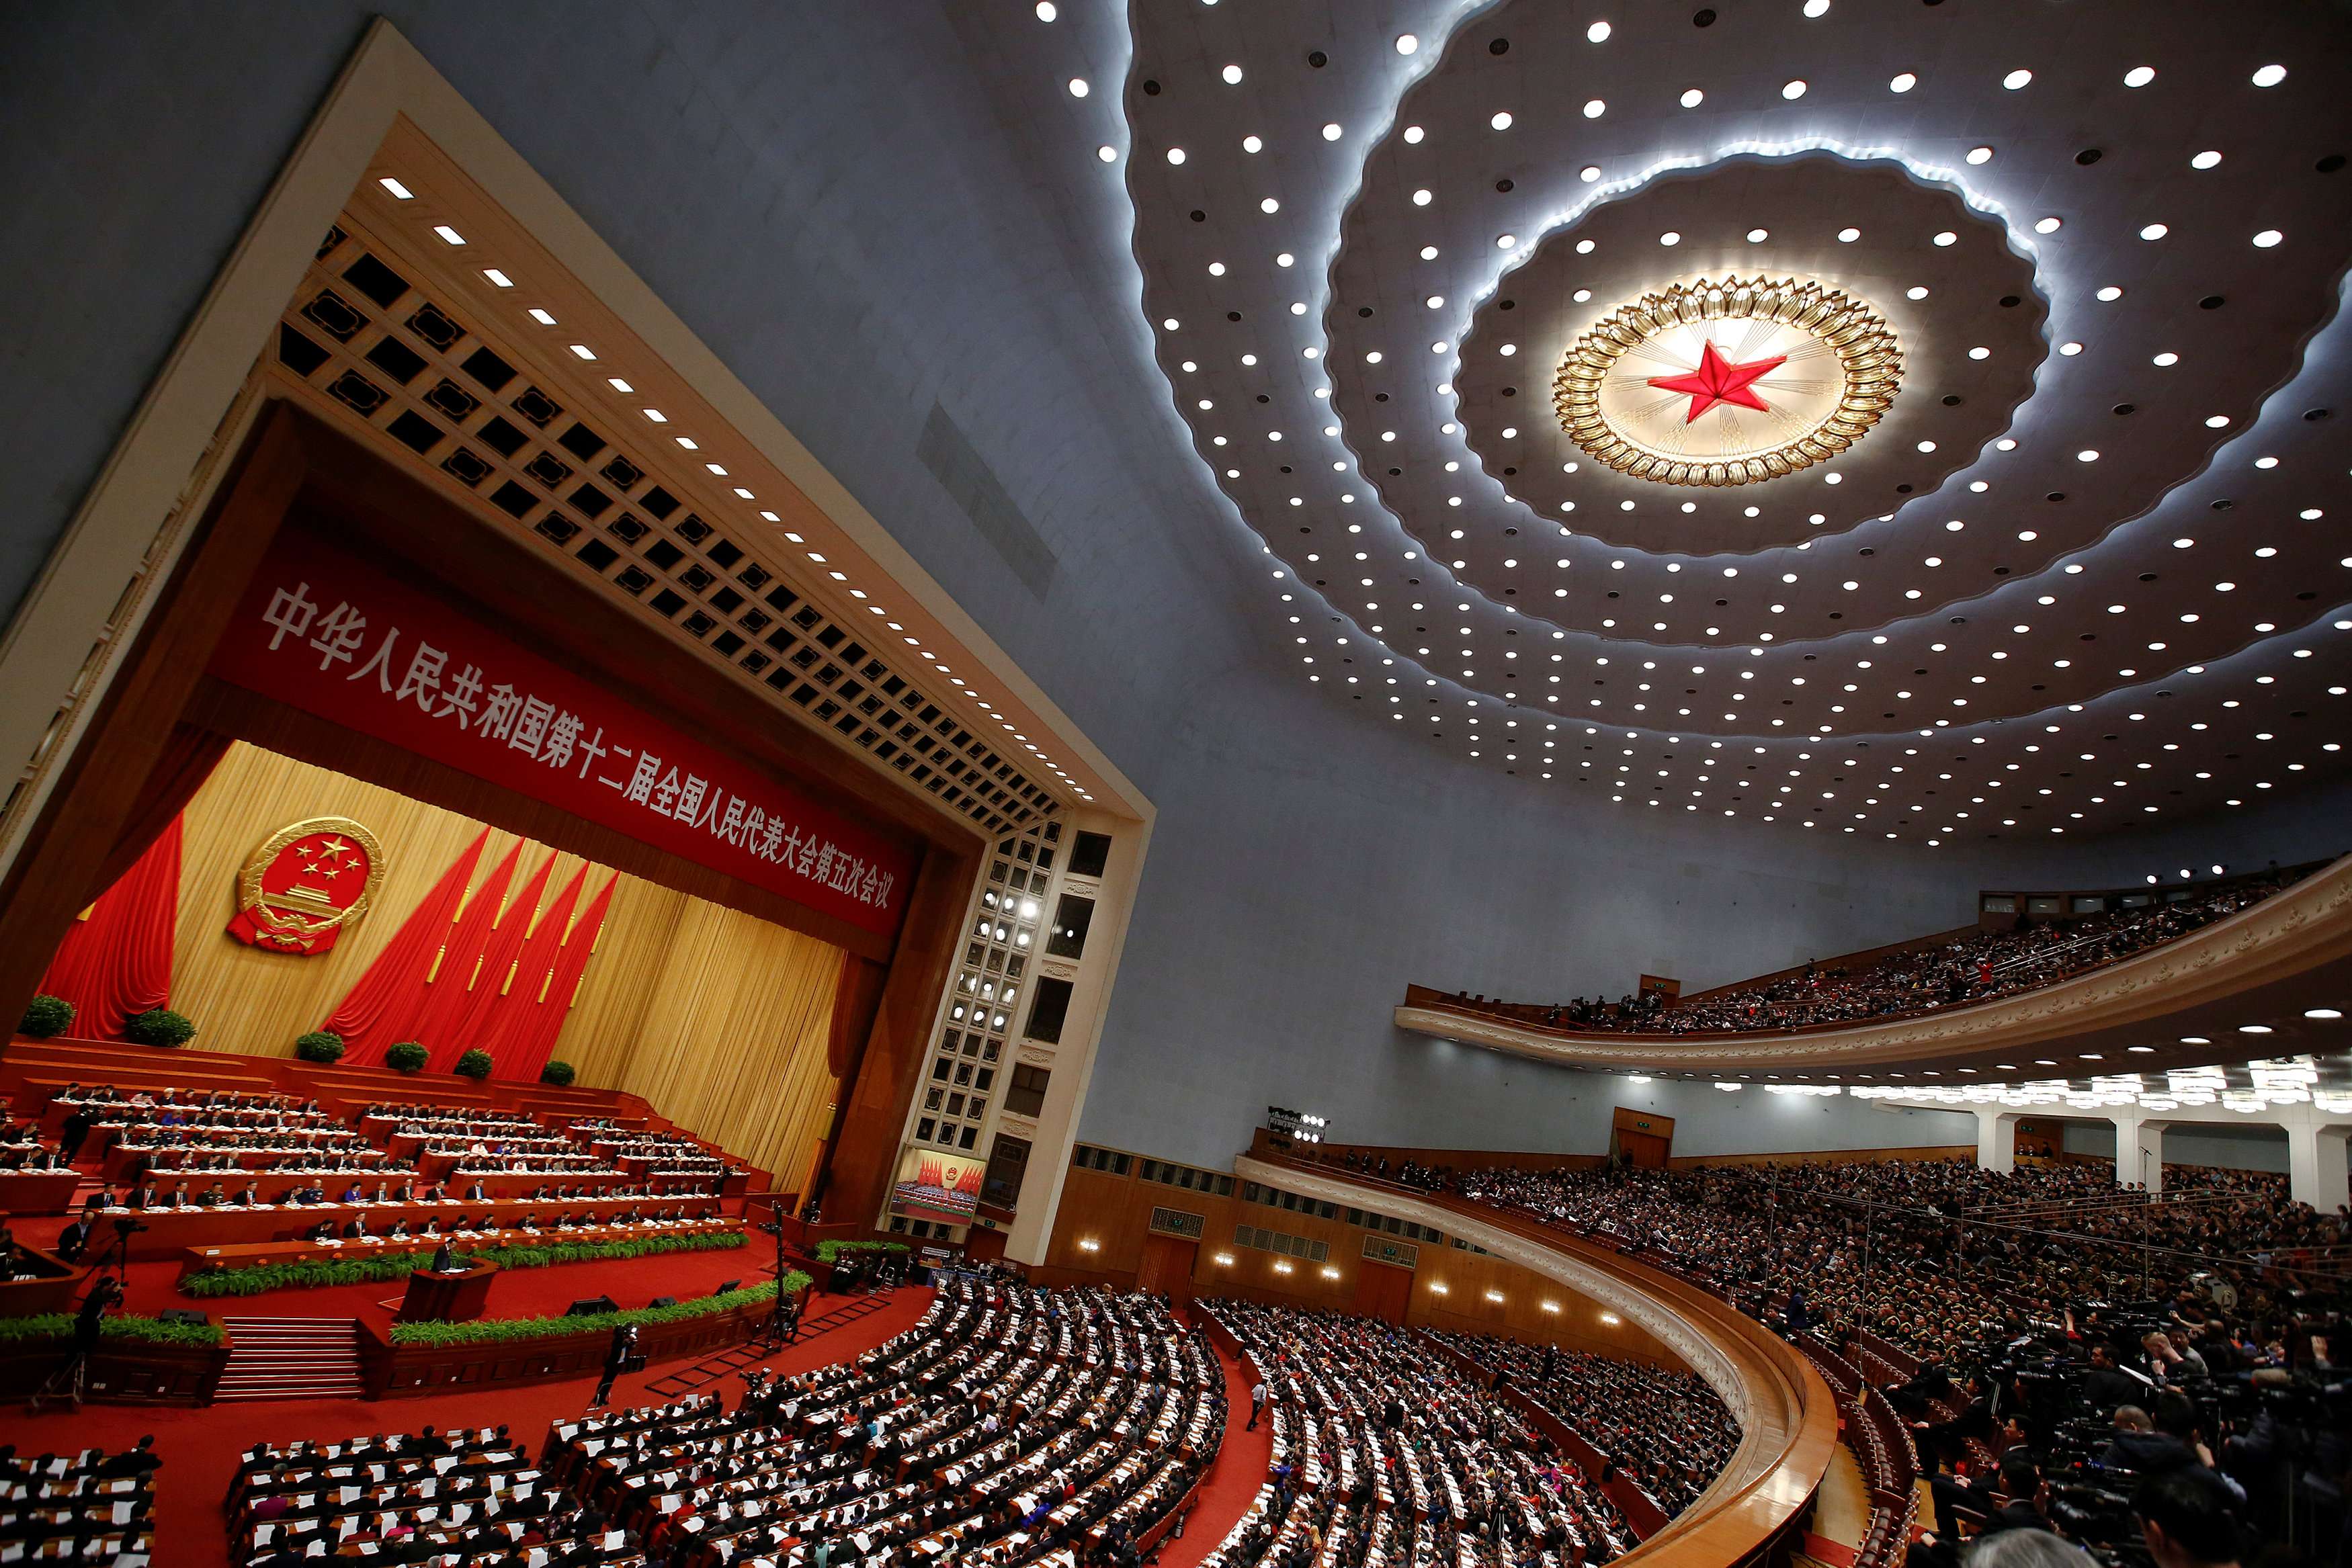 Premier Li Keqiang speaks during the opening session of the National People's Congress at the Great Hall of the People in Beijing on Monday. Photo: Reuters